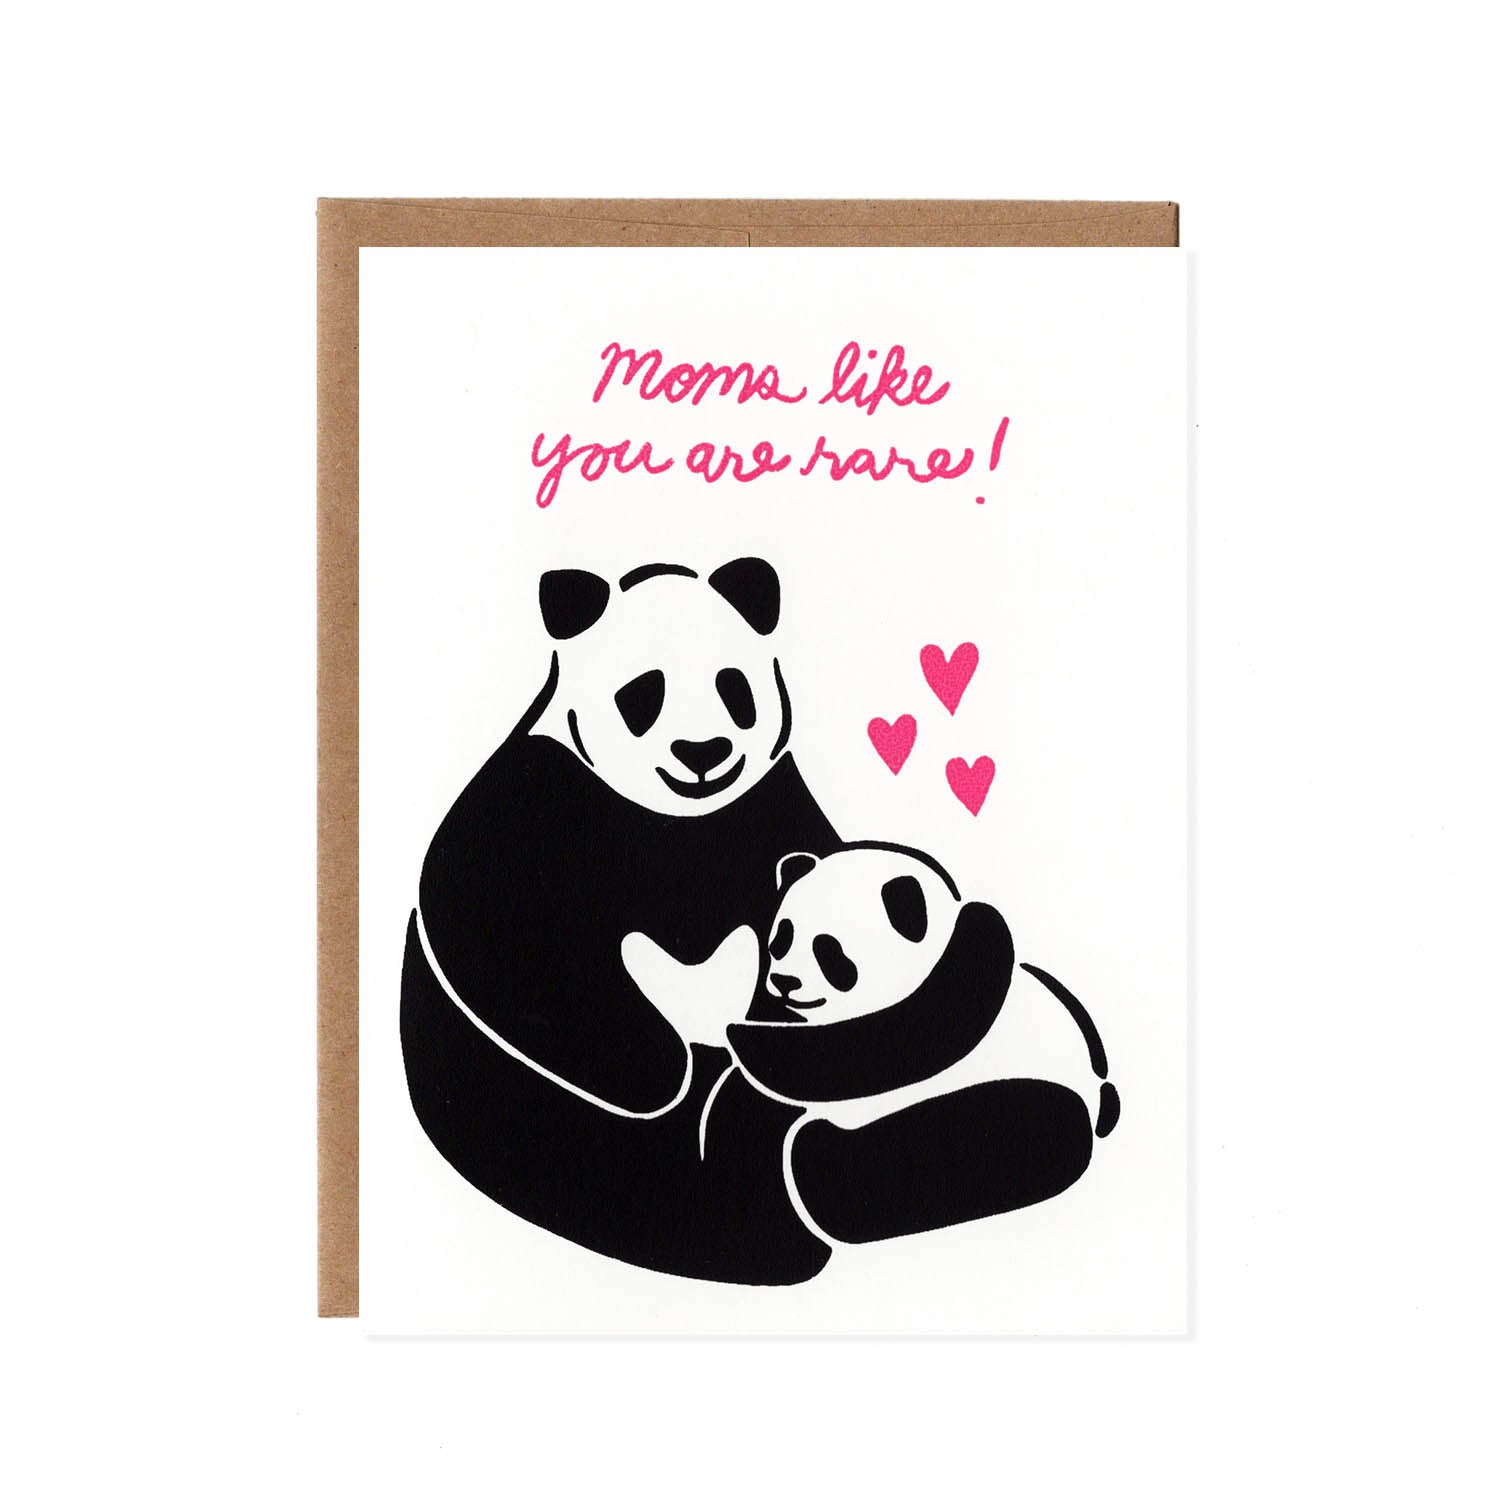 Product image for Mom's like you are rare! -- Panda Card for Moms